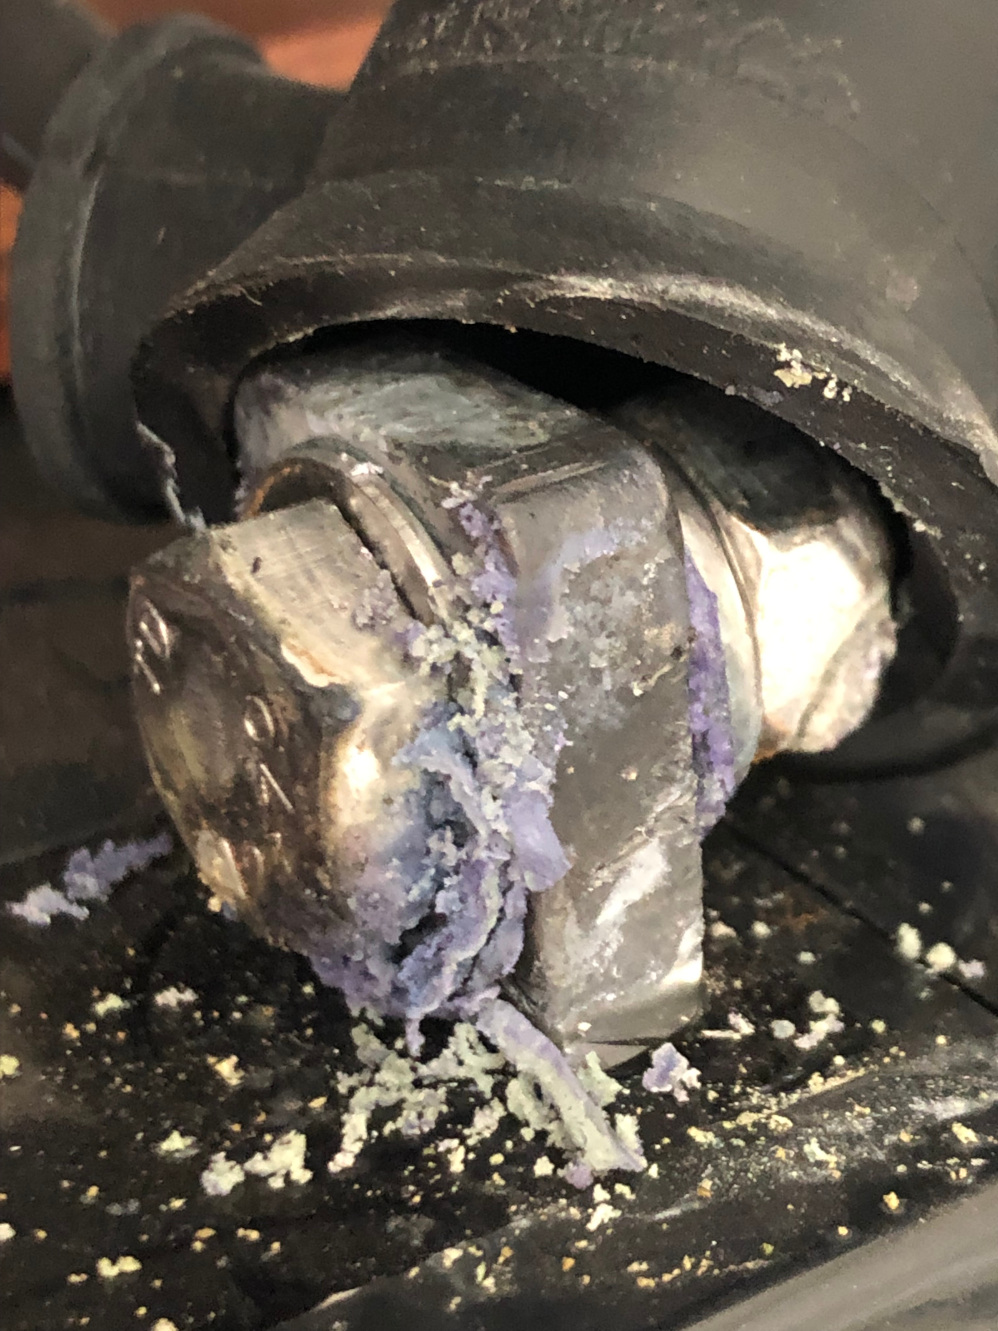 Corroded battery backup terminal connection for a high voltage maintenance audit